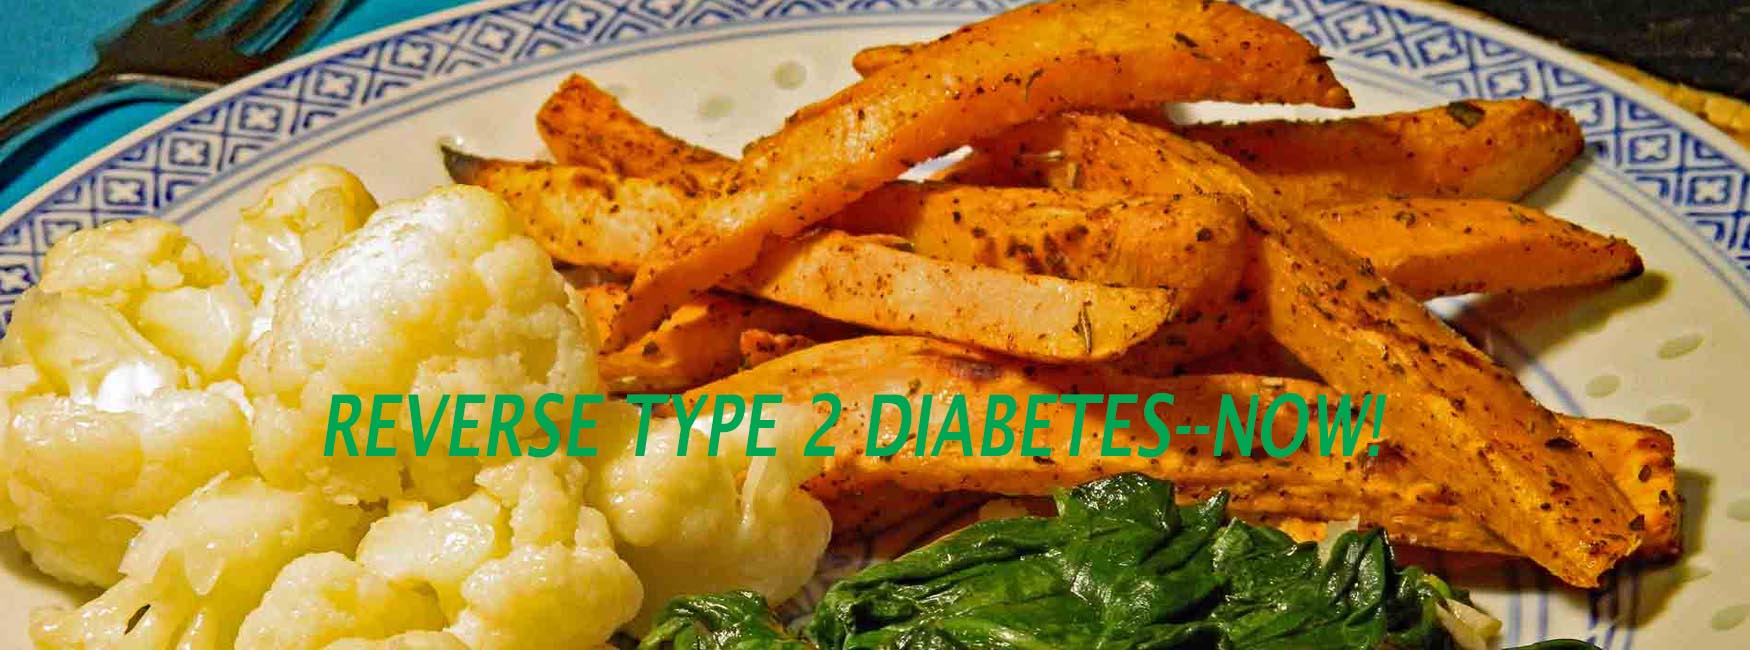 Attack diabetes with a plant based diet.